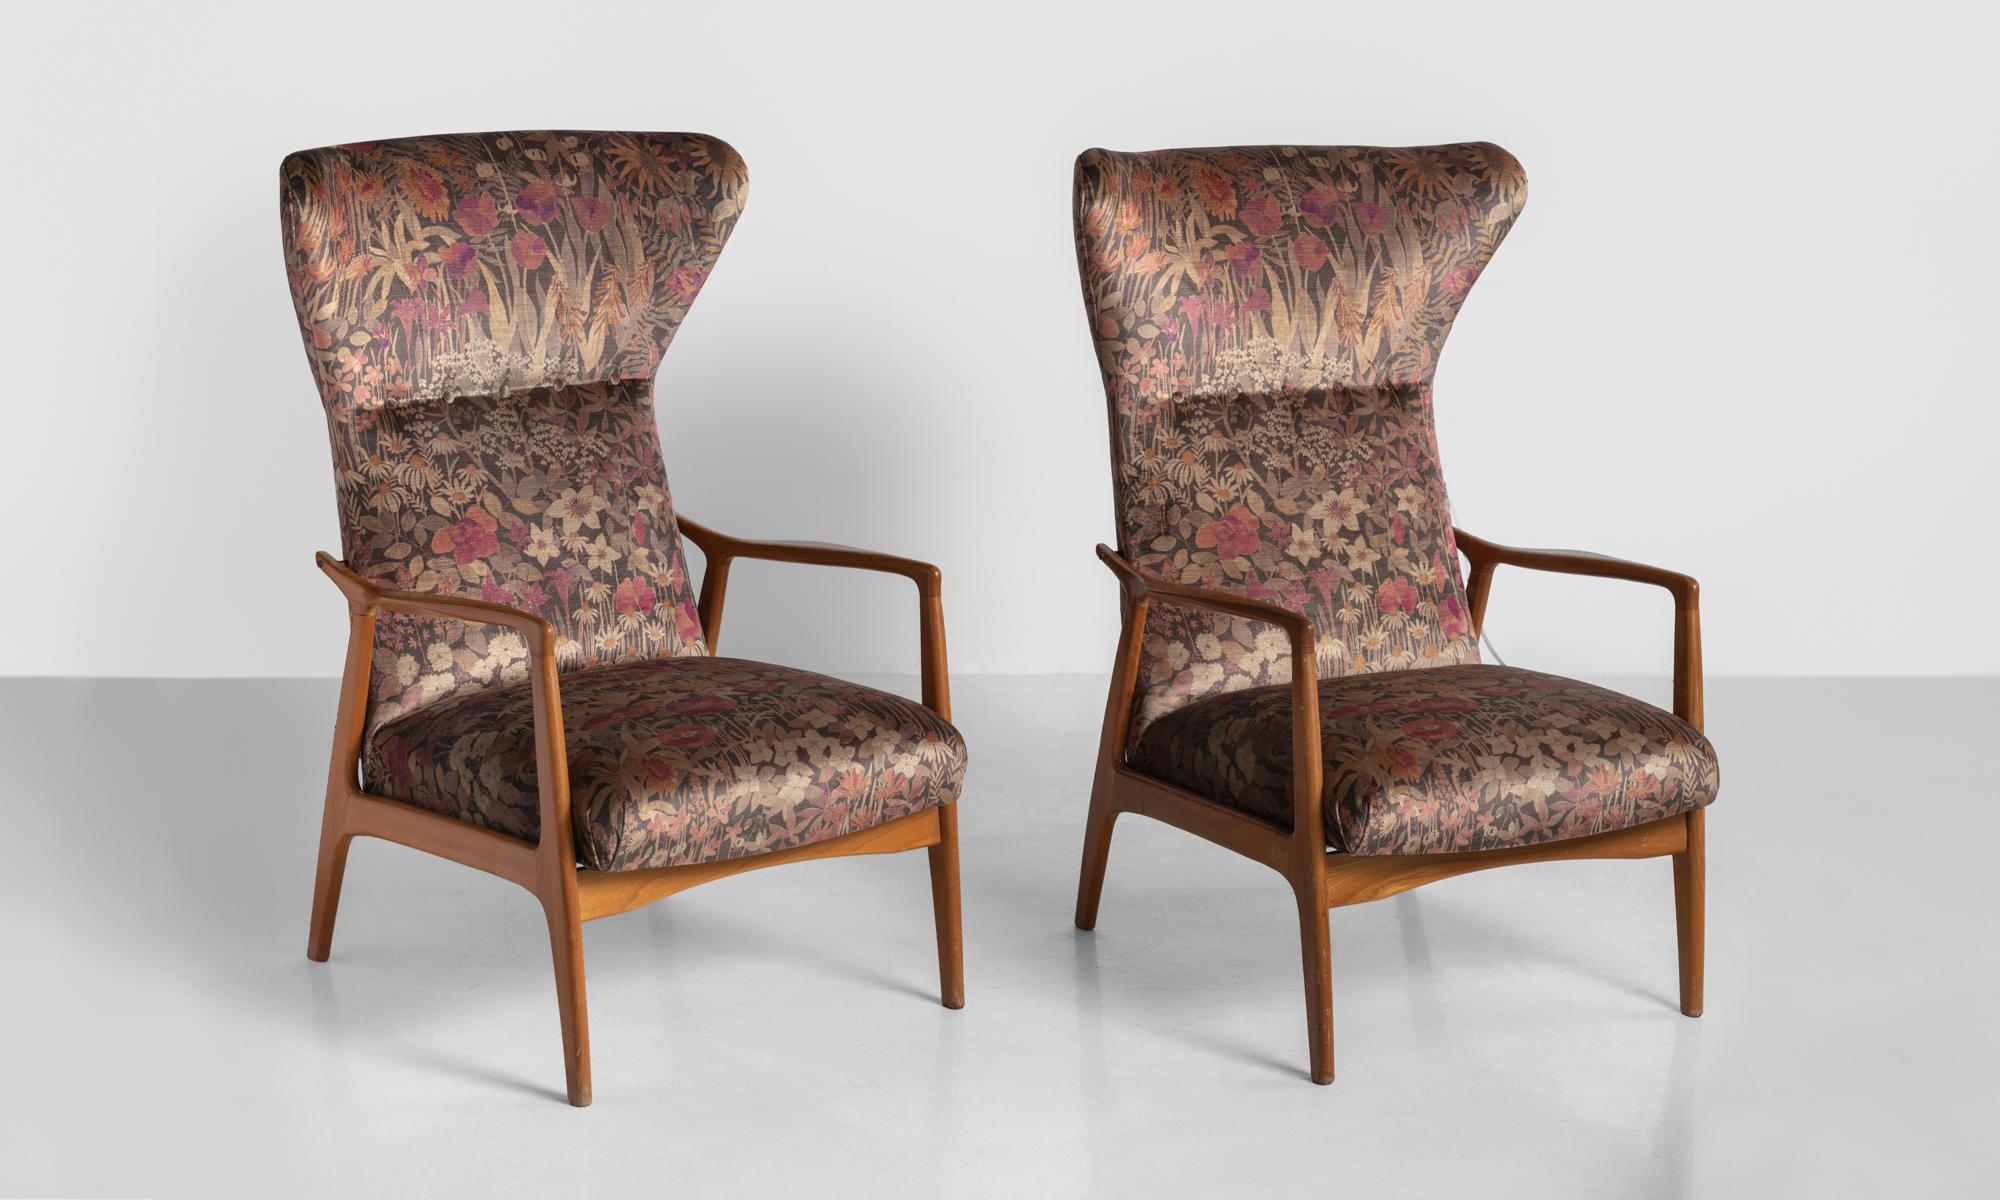 Modern Wingback Armchairs, France, circa 1950

Tall forms, newly upholstered in liberty of London velvet.